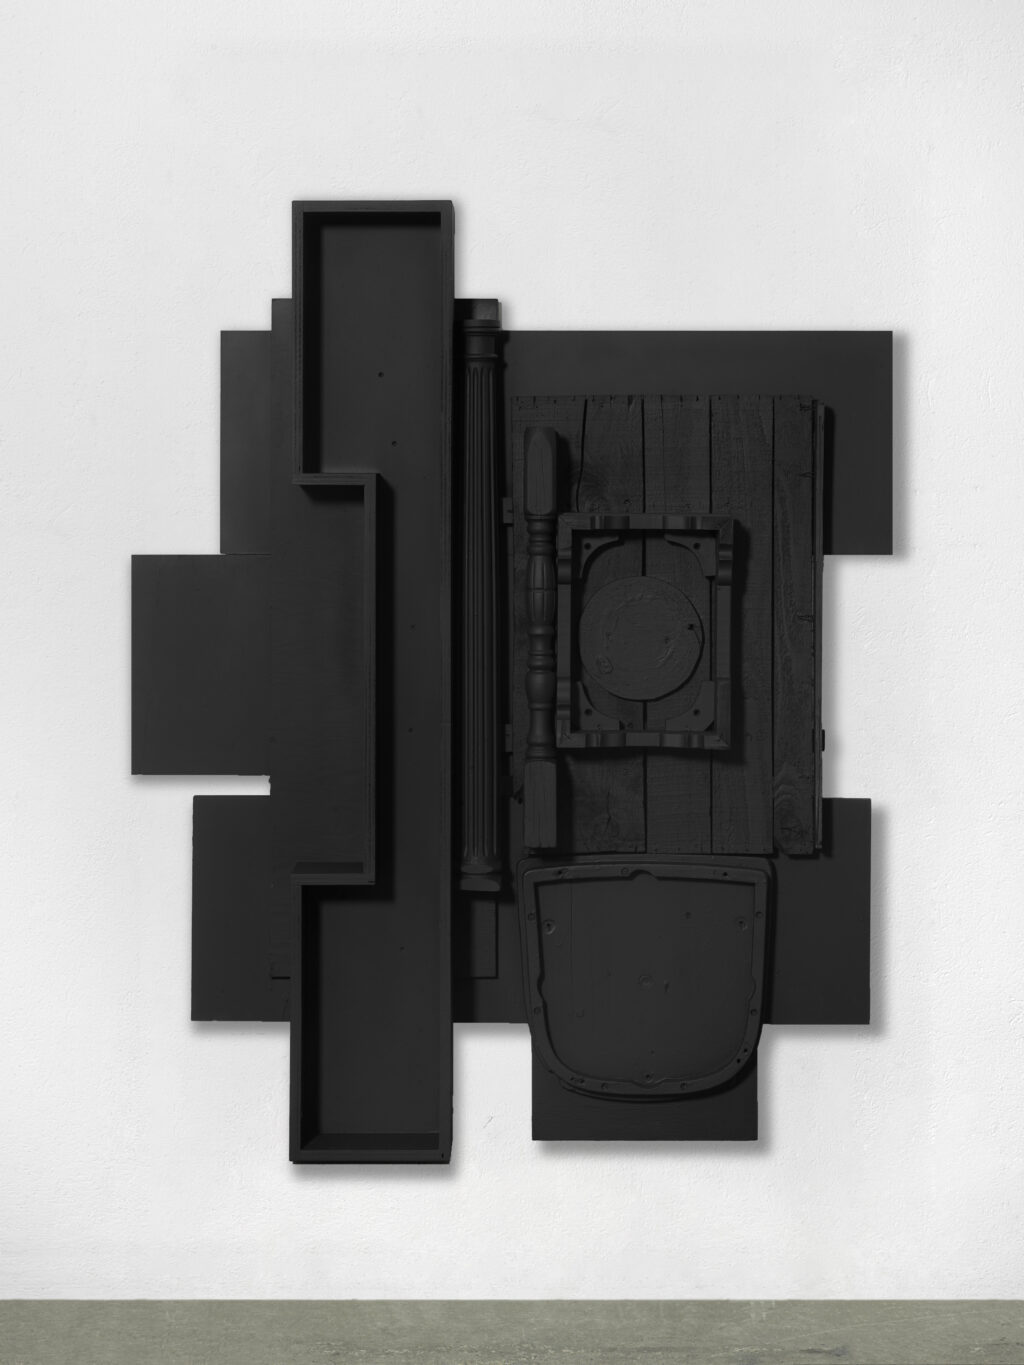 <p>GALERIE MICHAEL HAAS</p>
<p> </p>
<p>Louise Nevelson, untitled, ca. 1982 © Private collection. Courtesy Gió Marconi Gallery, Milan</p>
